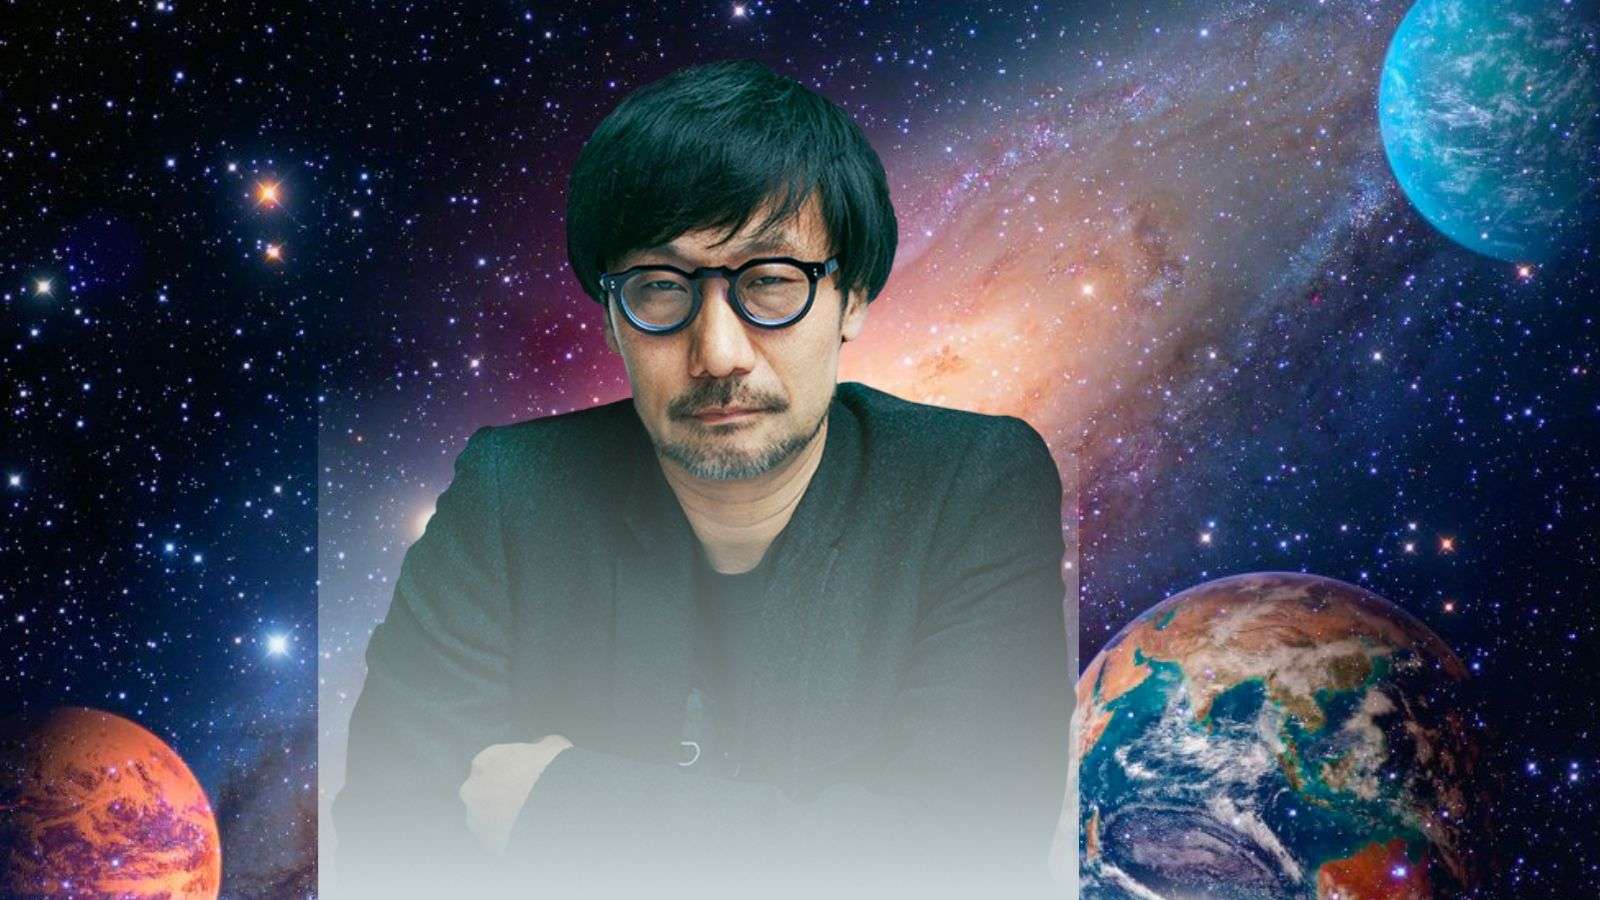 Hideo Kojima wants to make a game in space